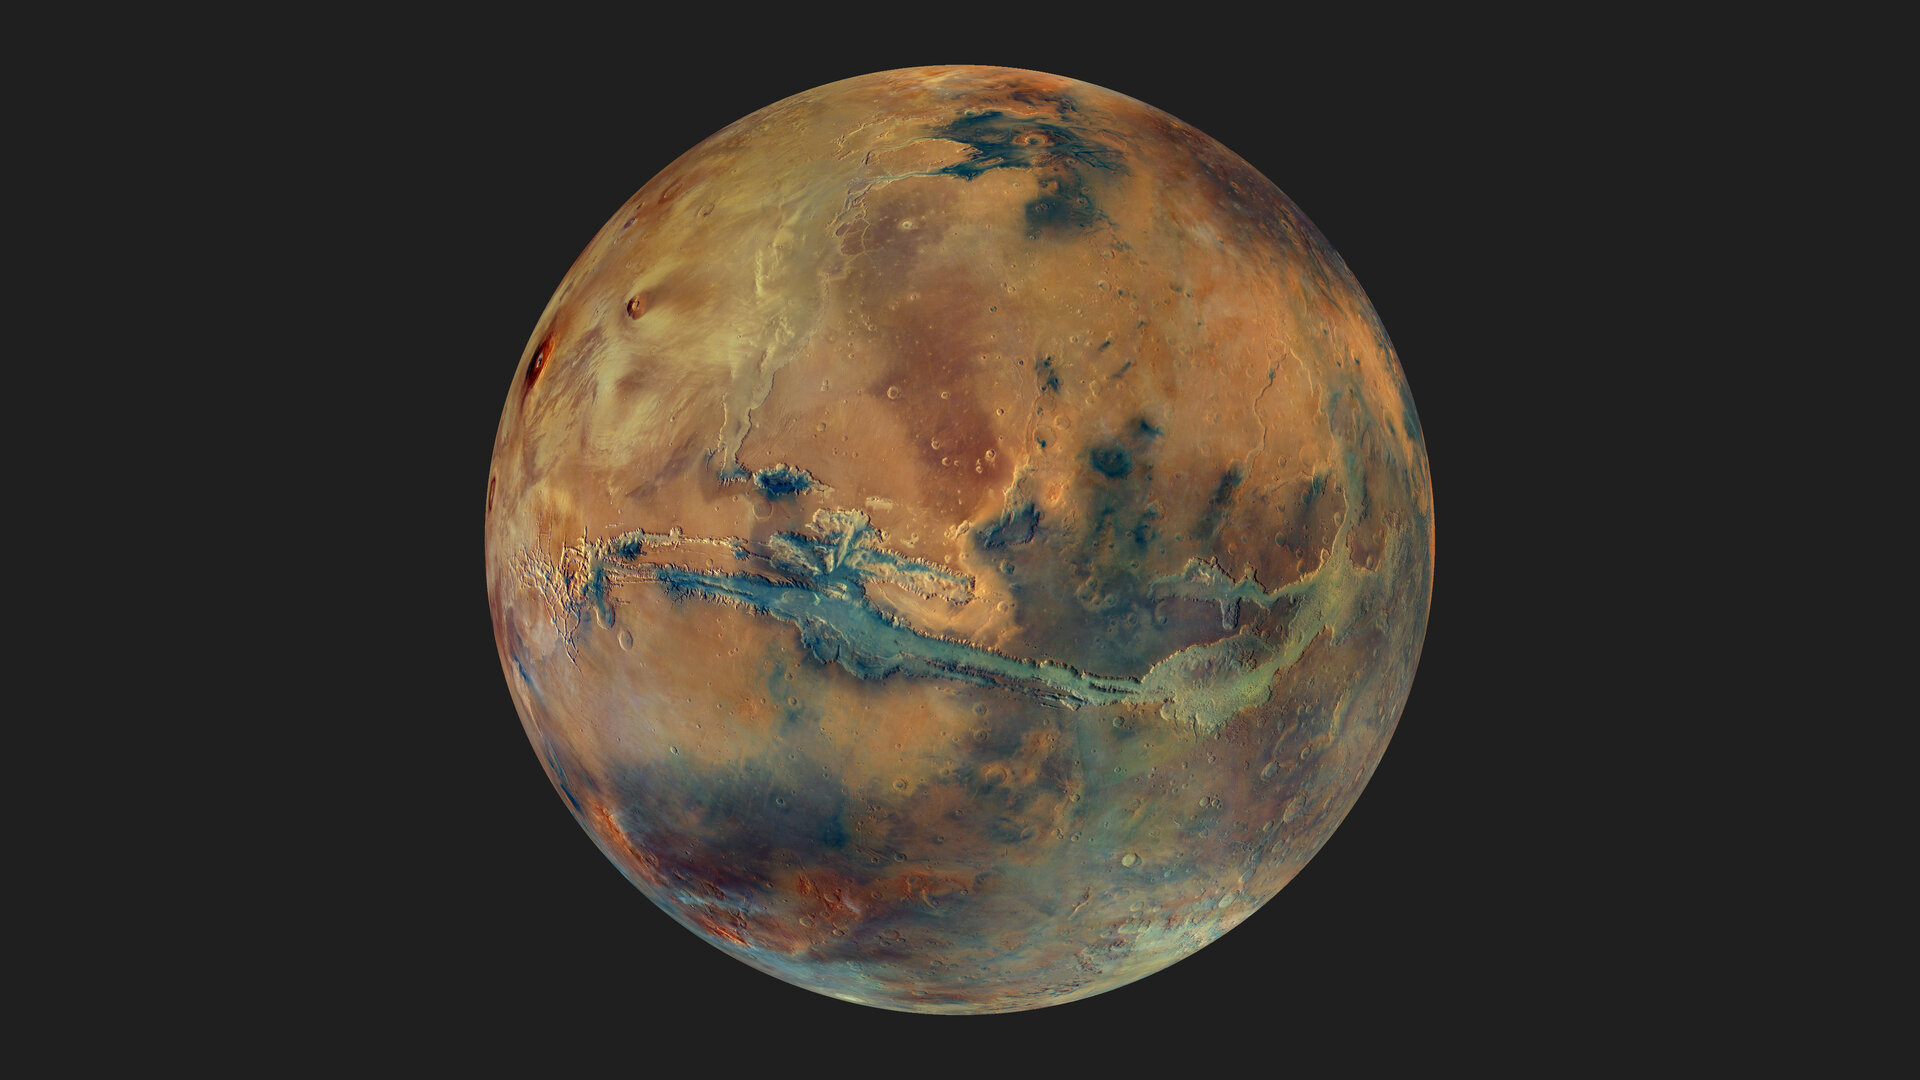 New evidence for an unexpected player in Earth’s multimillion-year climate cycles: the planet Mars